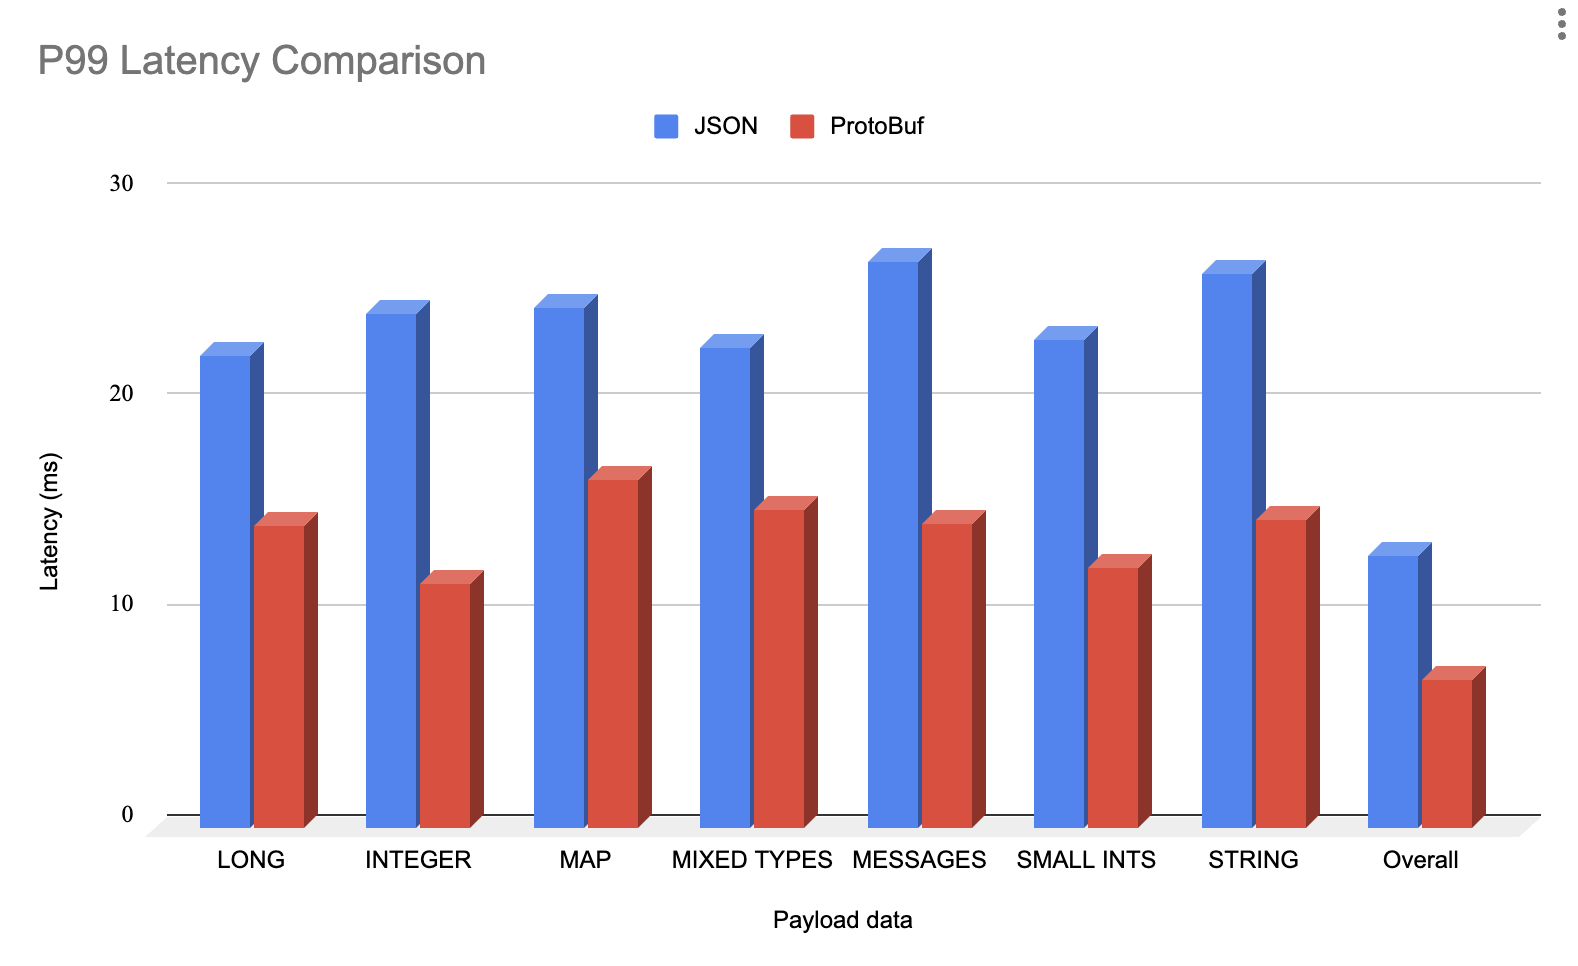 Chart that shows latency comparison chart from benchmarking Protobuf against JSON when servers are under heavy load